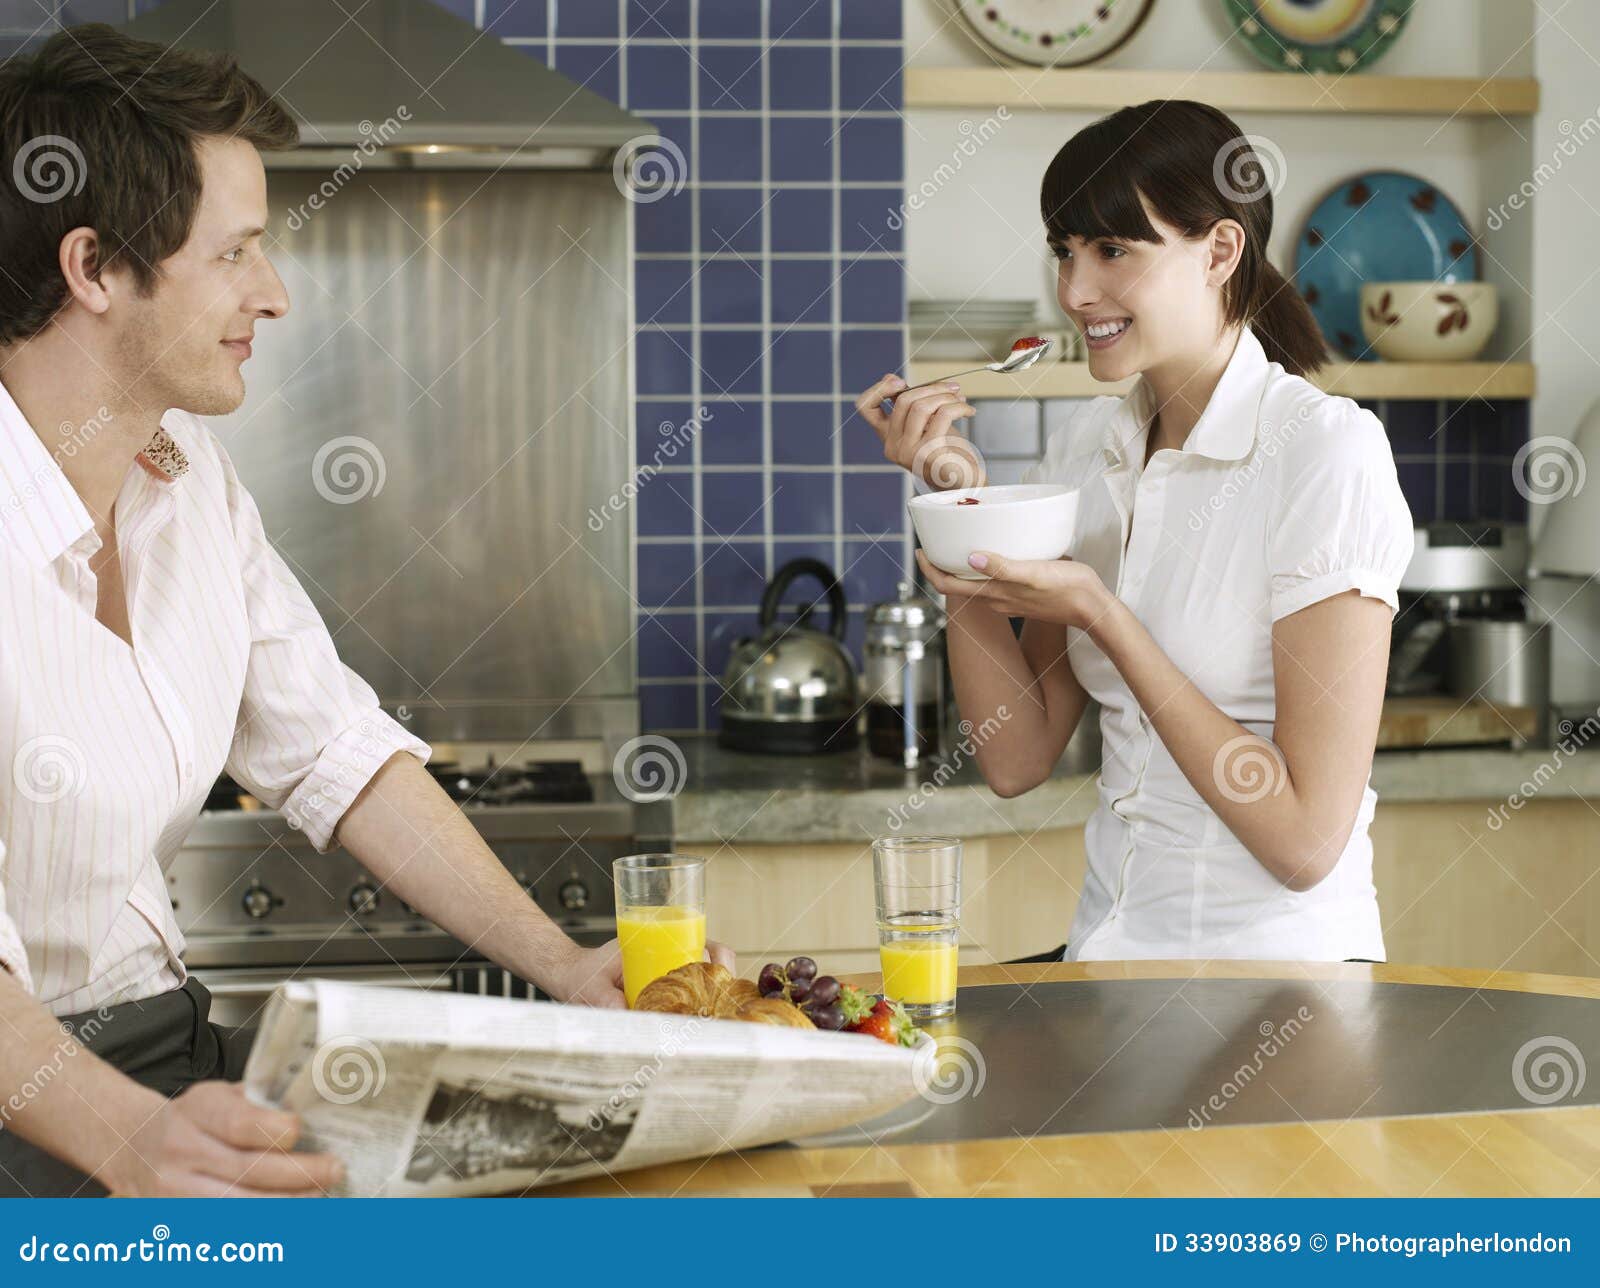 Couple Having Breakfast At Kitchen Table Royalty Free Stoc